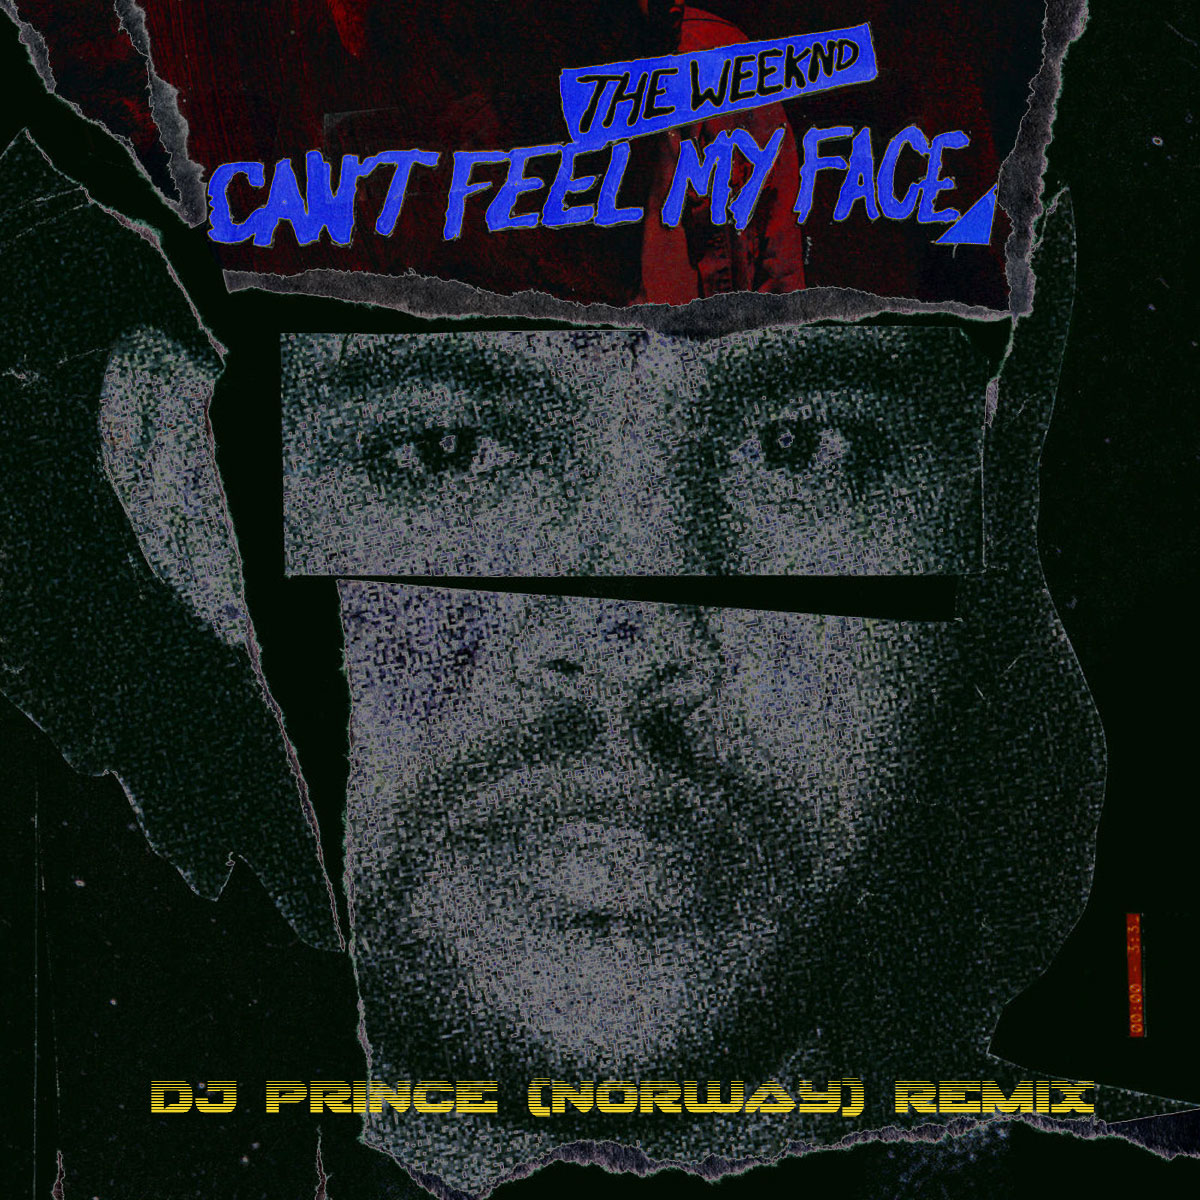 Weeknd - I can't feel my face (DJ Prince Remix)